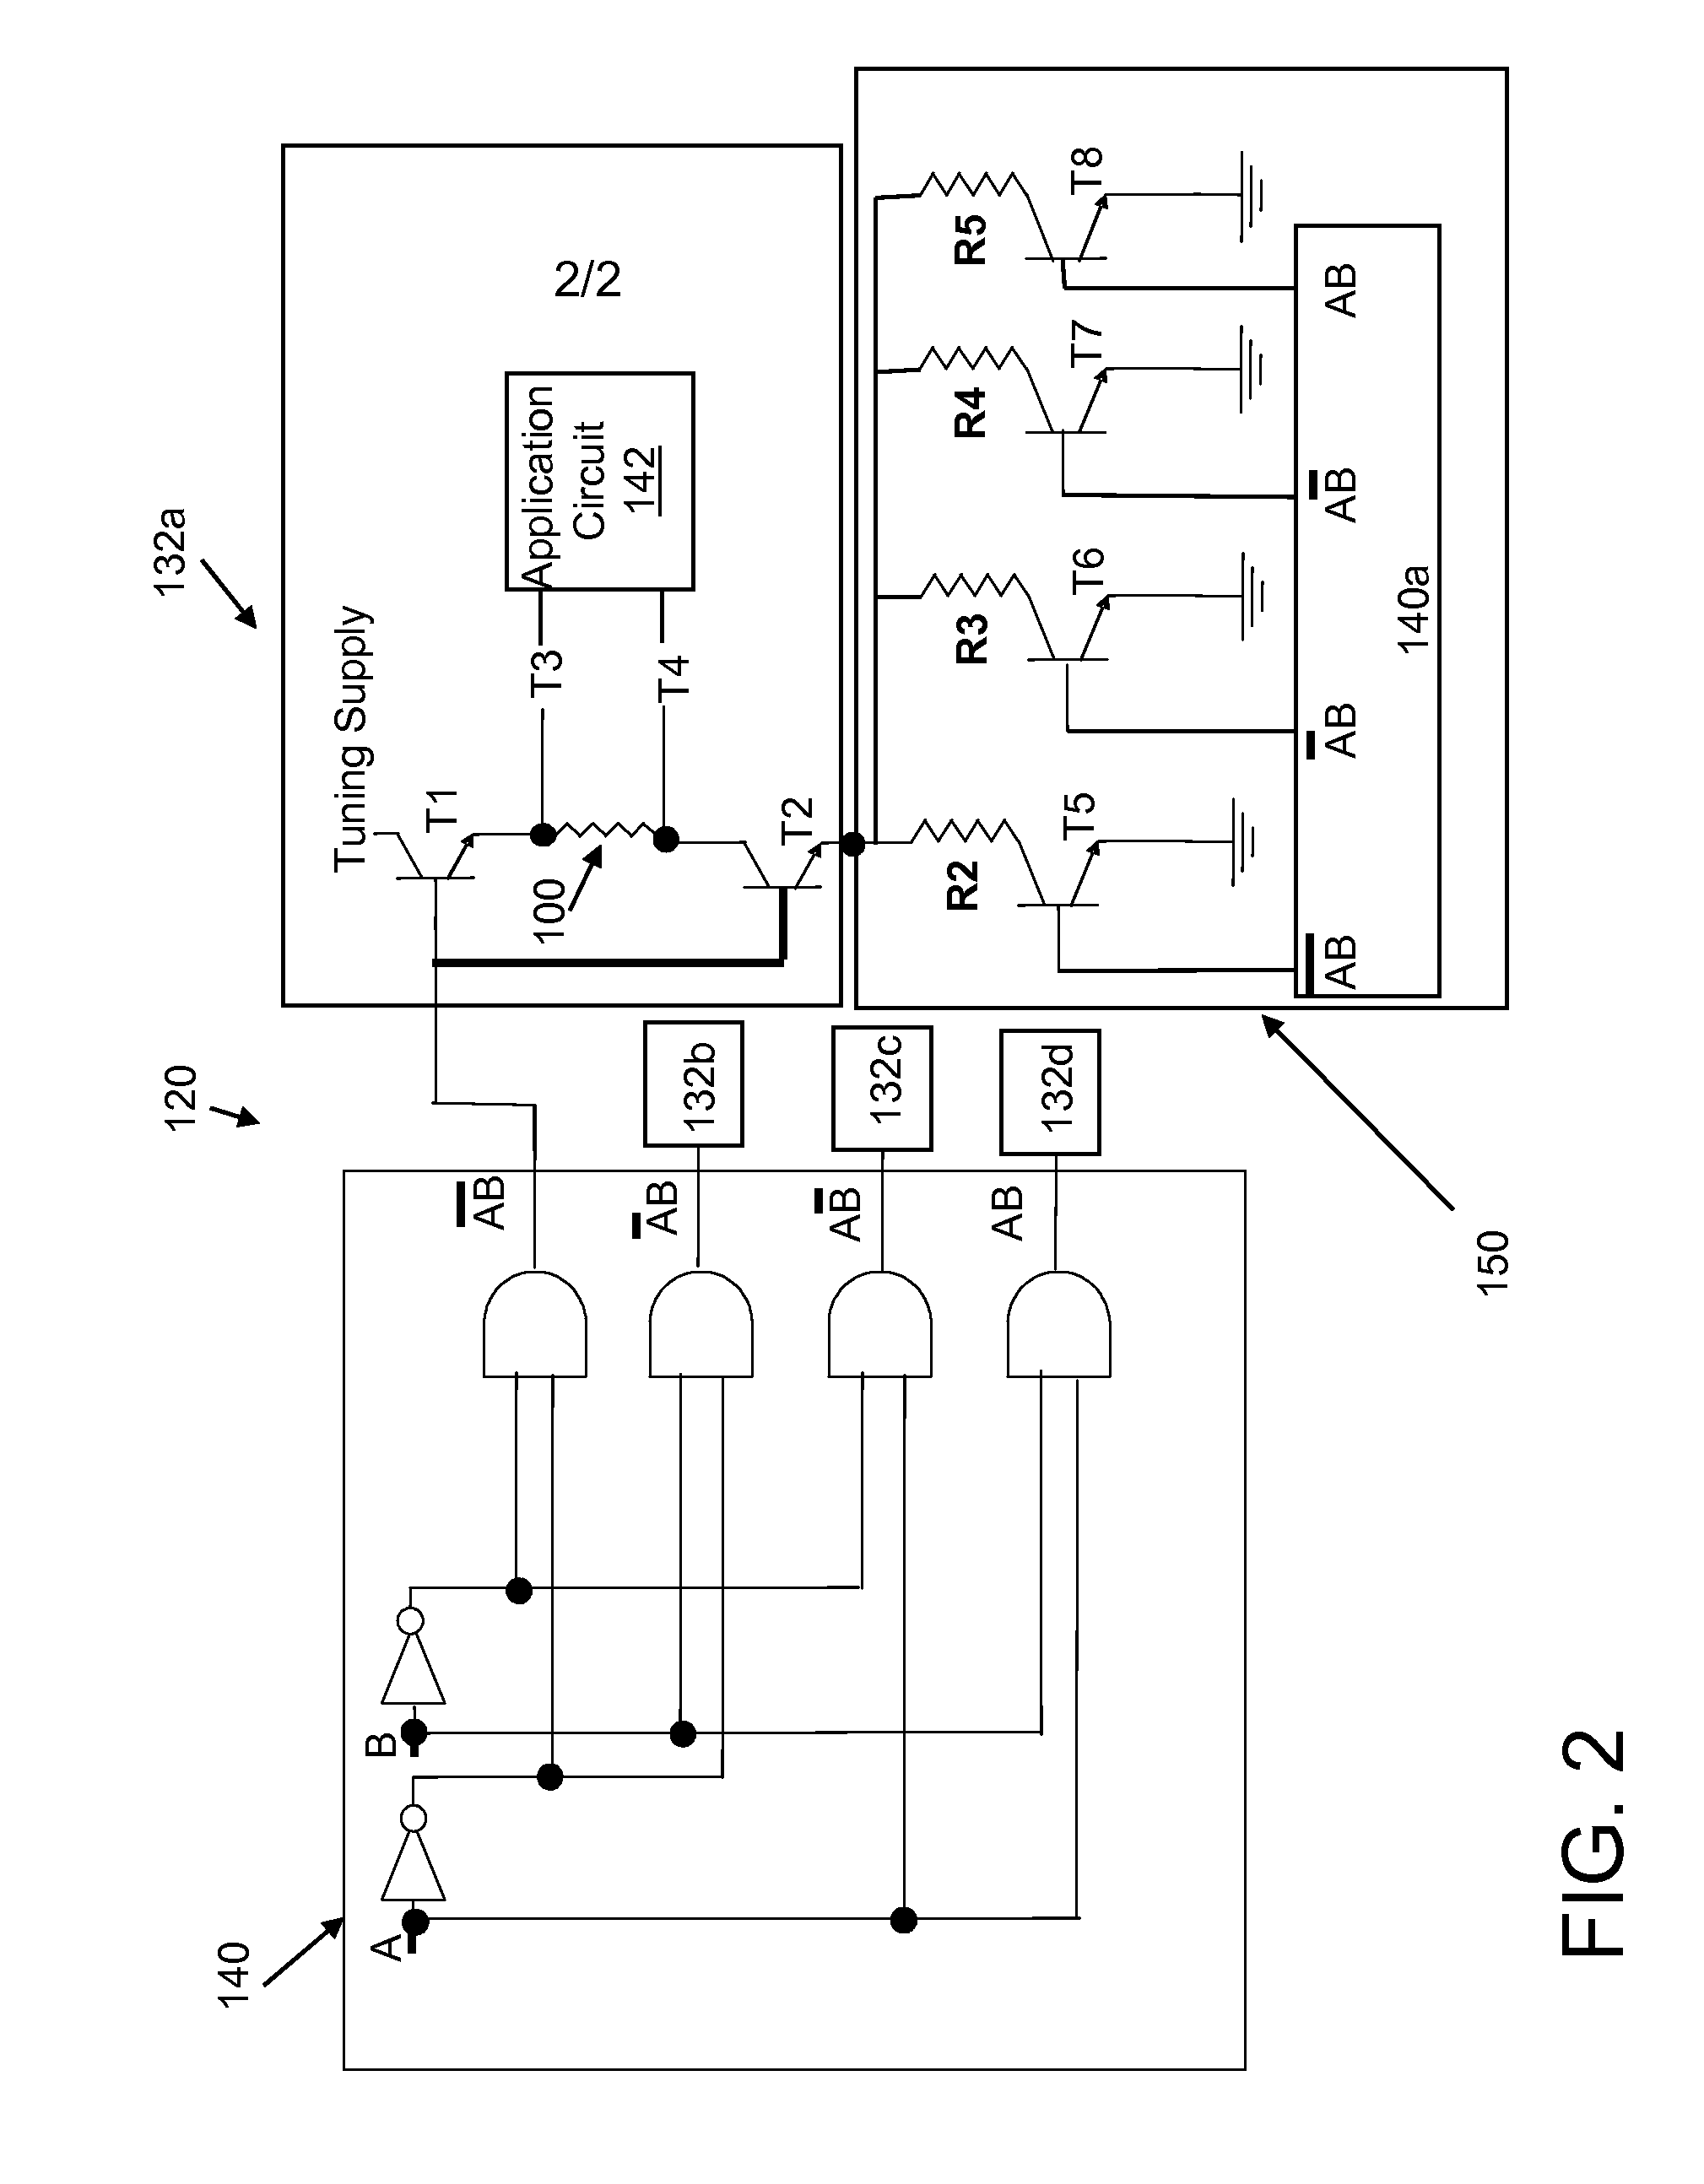 Design structure for electrically tunable resistor